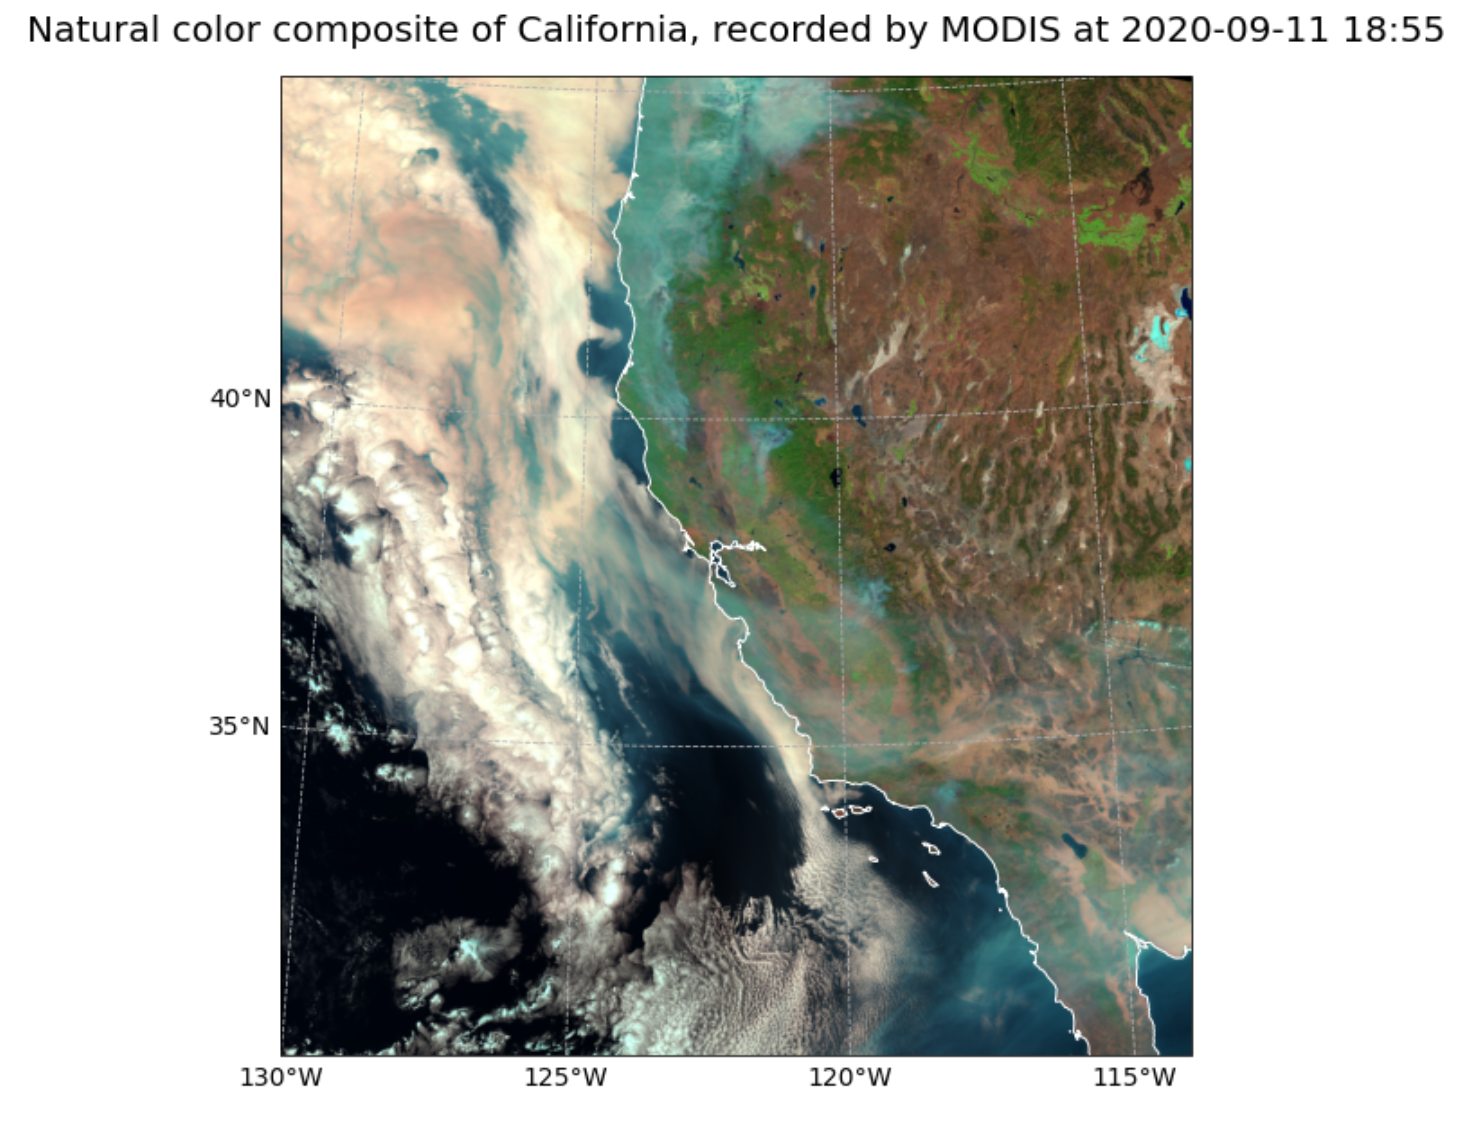 Figure 1. Natural colour composite of California at 500 m spatial resolution recorded by MODIS on 11 September 2020.